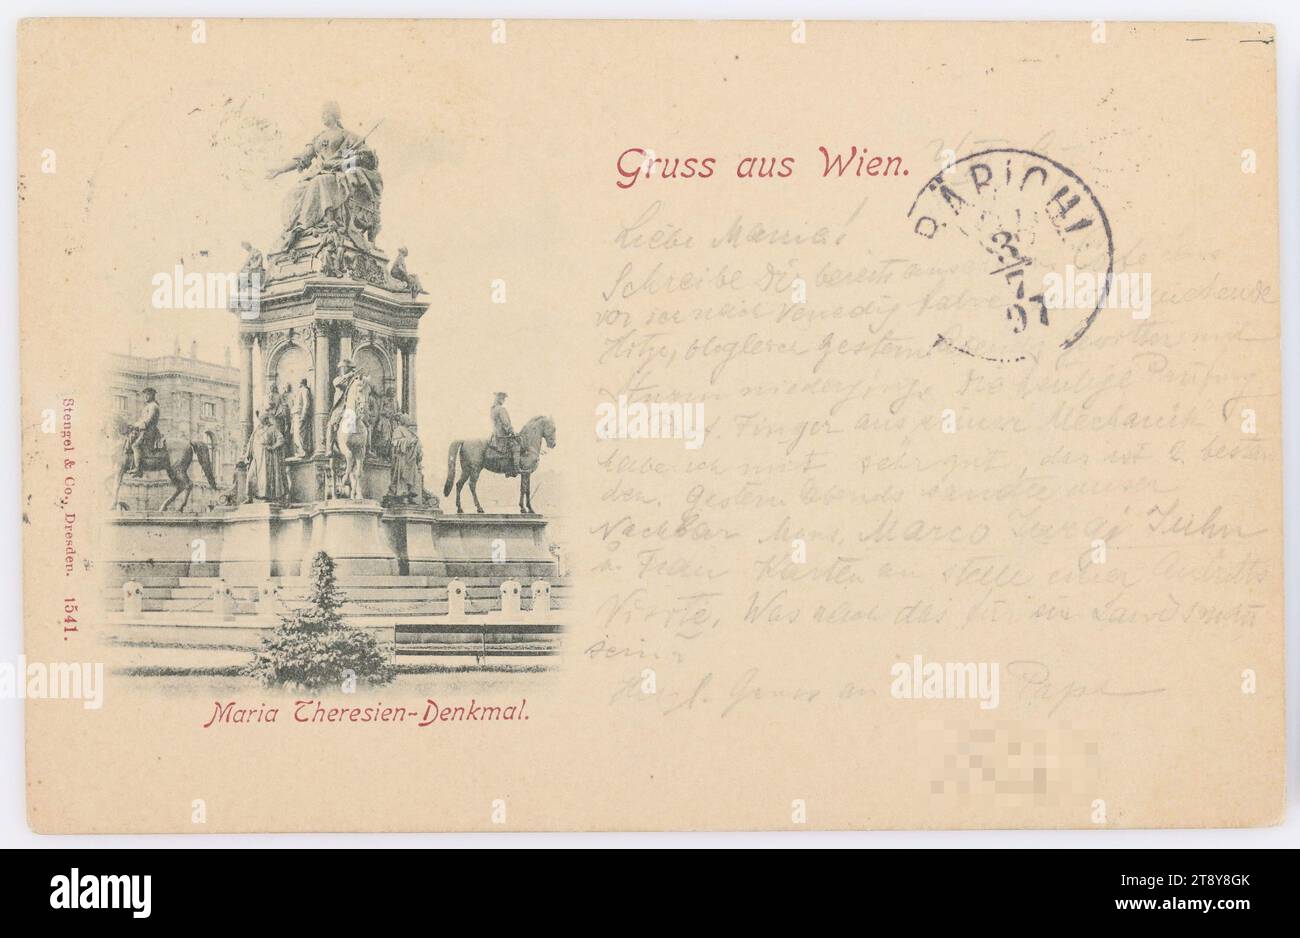 Greeting from Vienna. Maria Theresa Monument, Stengel & Co, Dresden, manufacturer, 1897, cardboard, collotype, inscription, FROM, Vienna, TO, Prebichl near Eisenerz, ADDRESS, Hochwohlg. Frau, Prebichl near Eisenerz, Styria, MESSAGE, Dear Mom!, Write to you already from a cafe before I go to Venice, today oppressive heat, although yesterday evening thunderstorm with storm came down. Today's exam with Prof. Finger from 'pure mechanics' I passed with very good Stock Photo